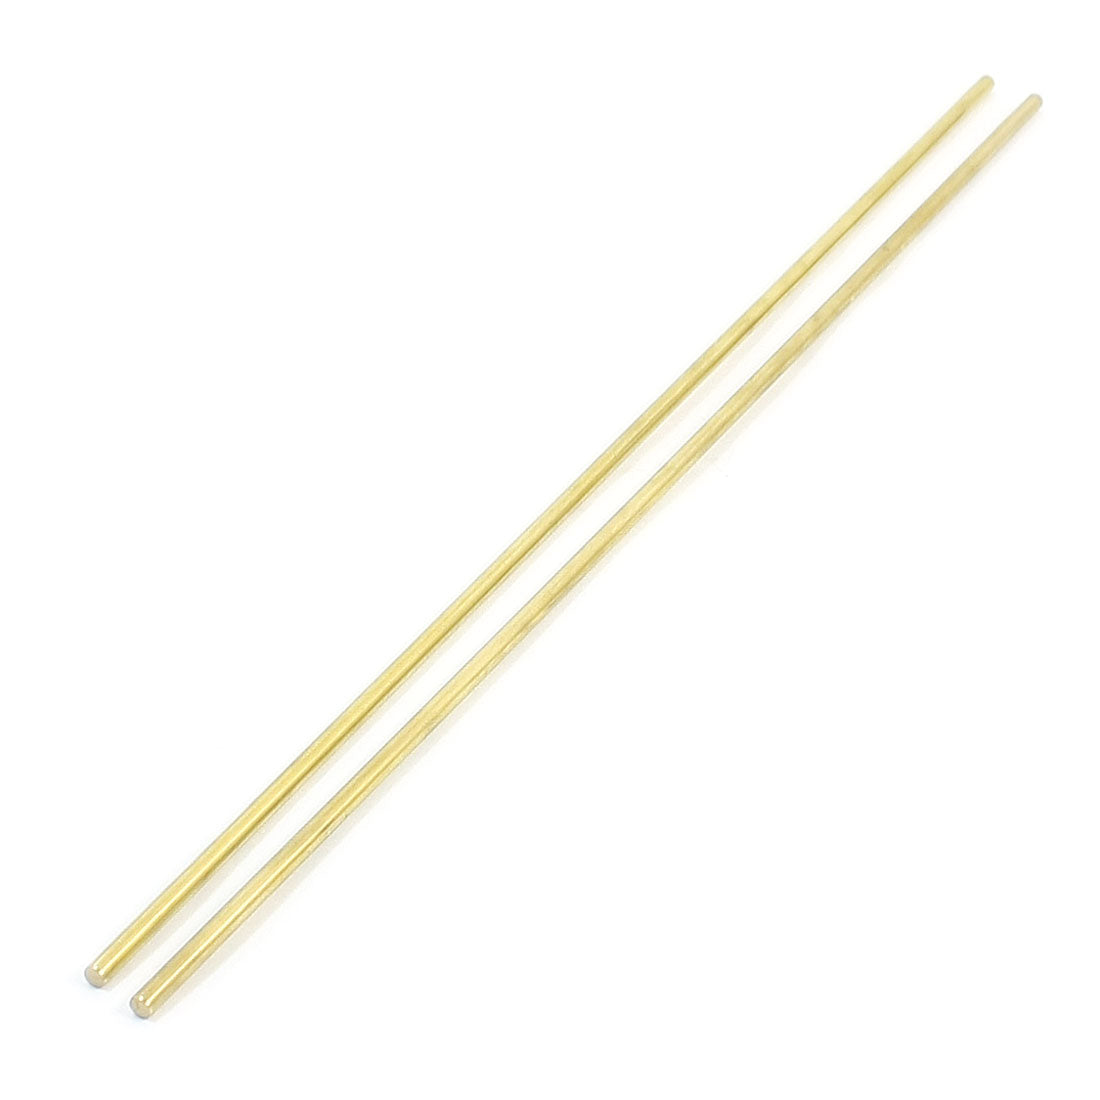 Uxcell Uxcell 2Pcs Gold Tone Brass 250mm x 3mm Round Rod Stock for CNC Lathe Machine